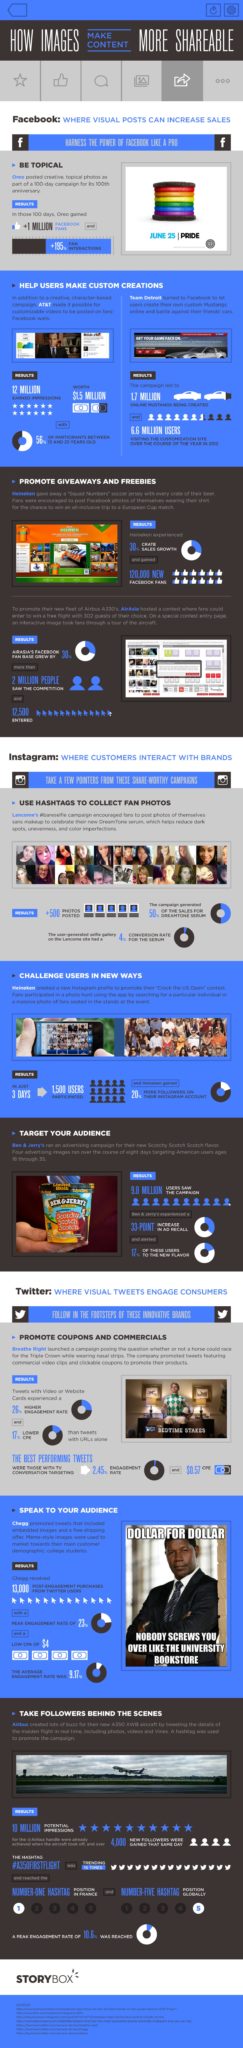 Infographic: How Images Make Social Content More Shareable